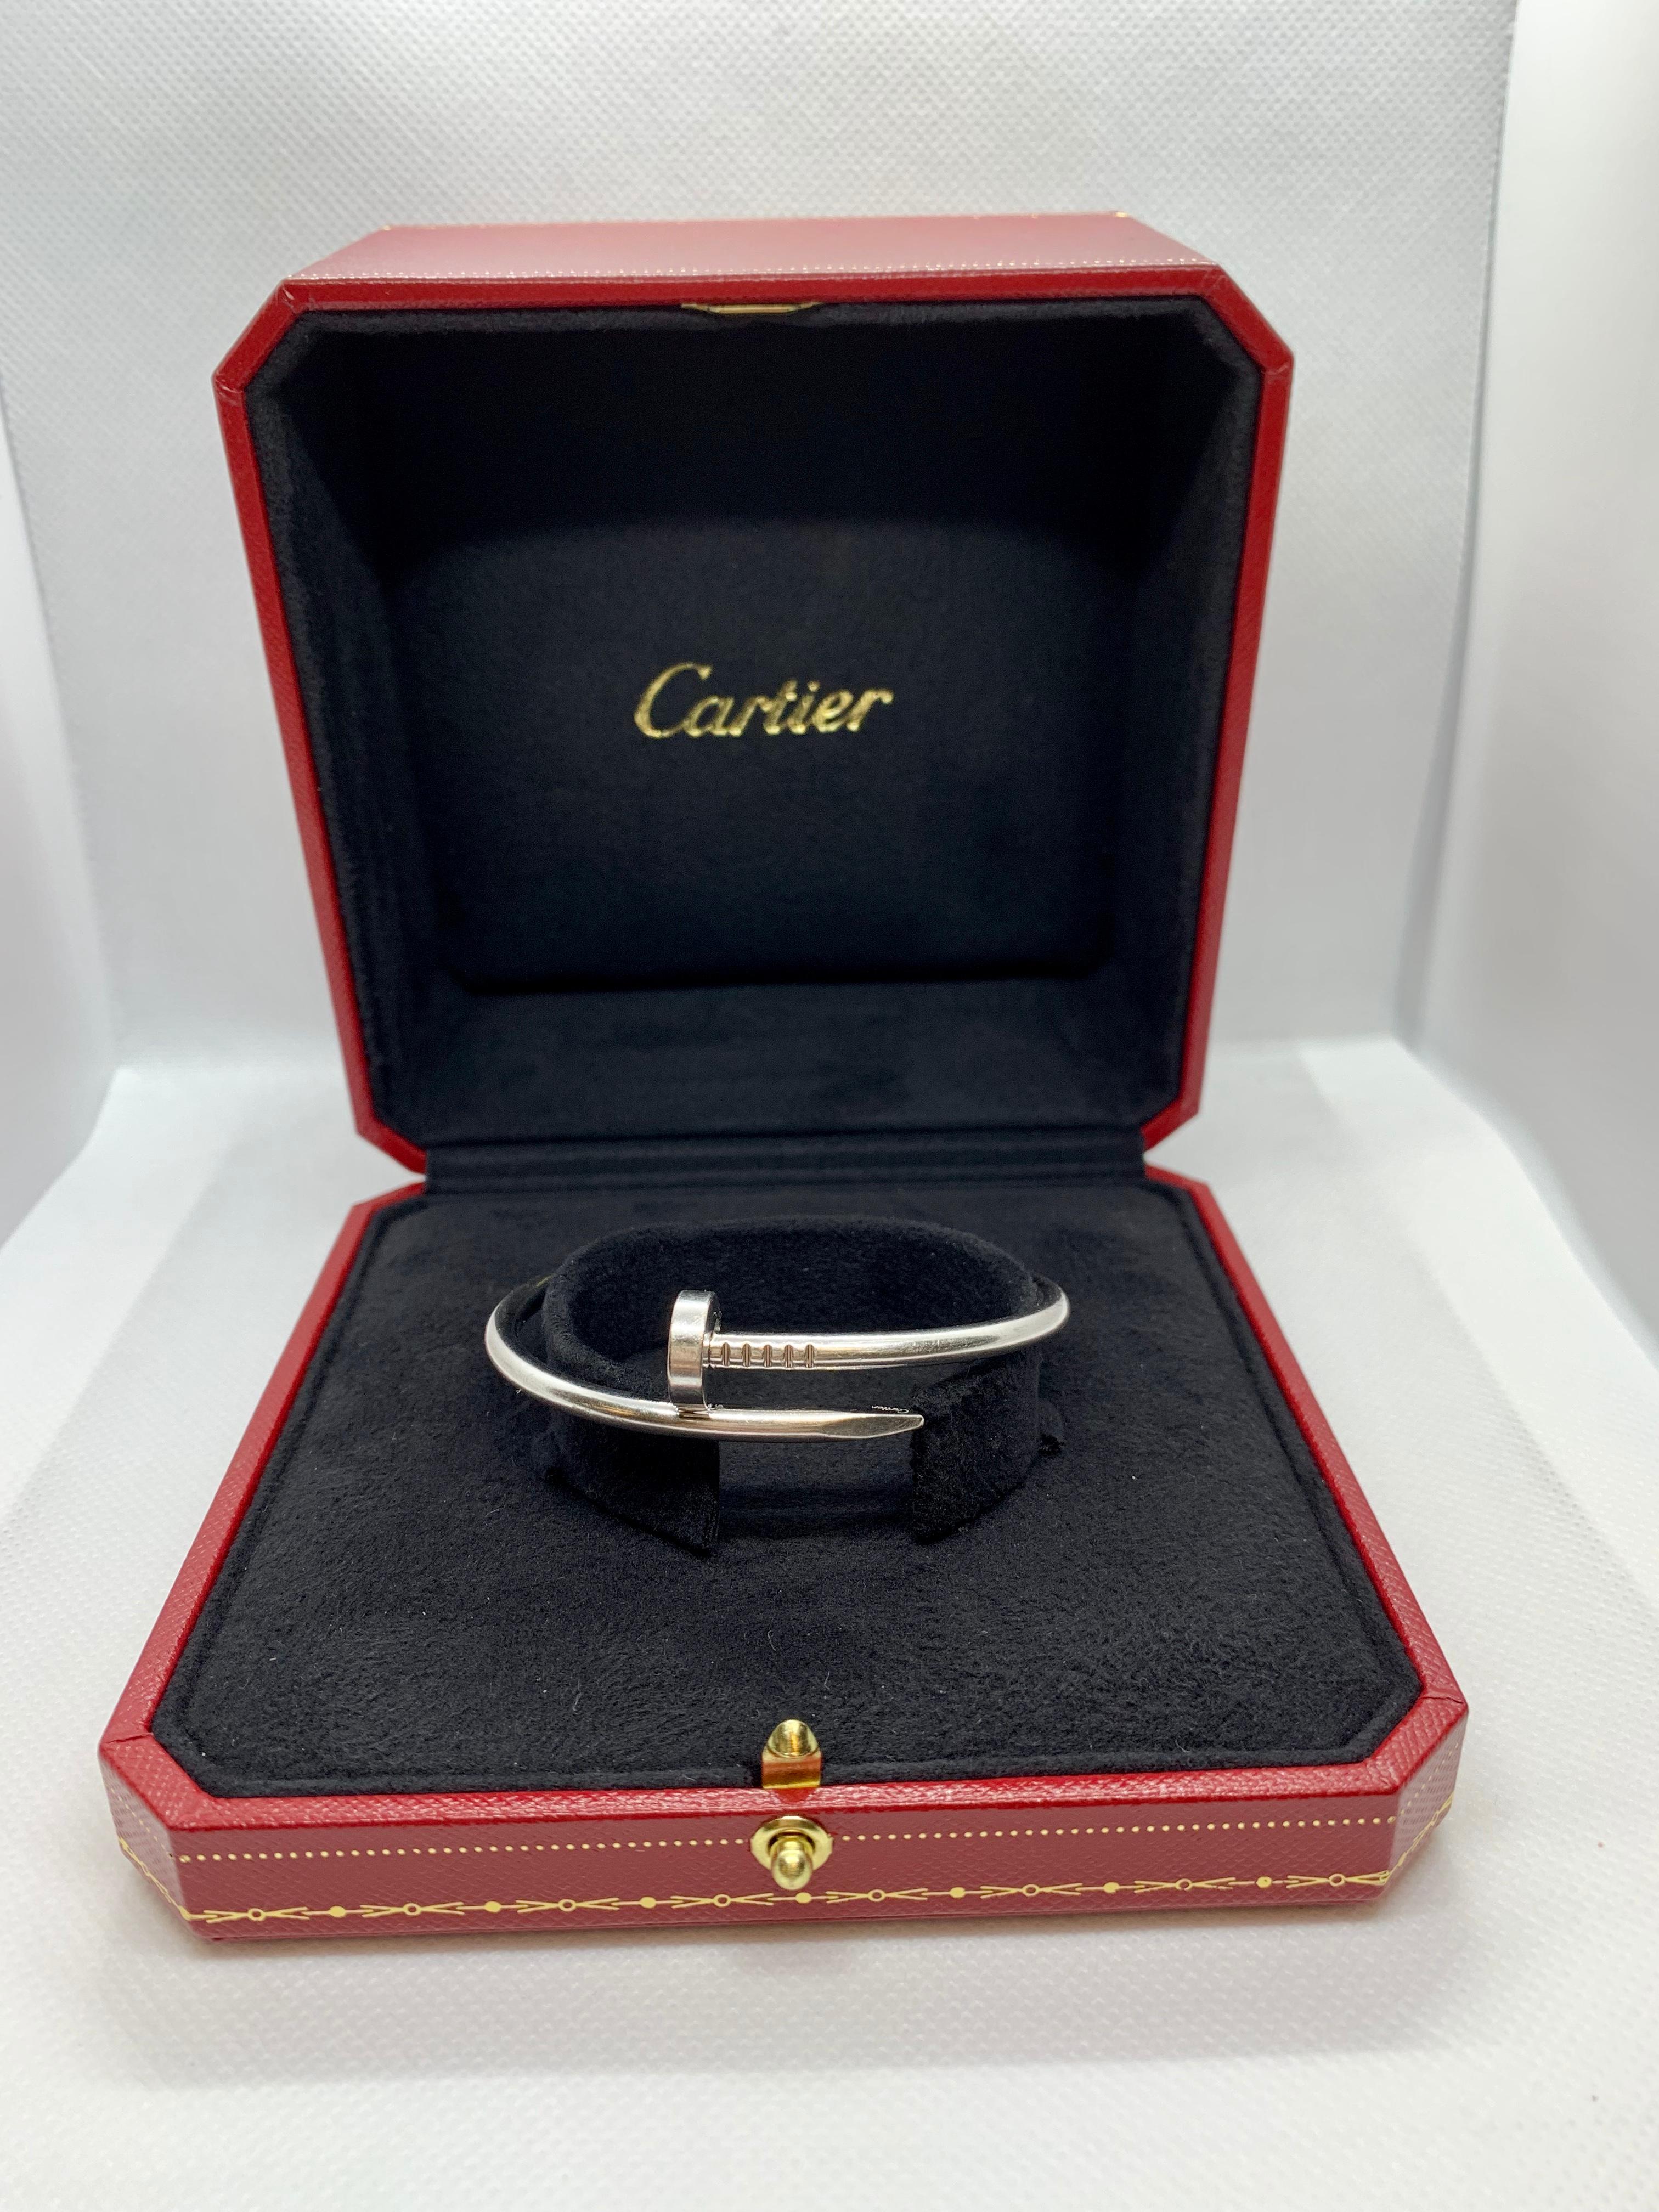 Gorgeous Cartier Juste Un Clou Bracelet! This piece is made in 18K White Gold, is a size 16 and has original Cartier Box and Papers. The weight is 34.0 Grams and Serial # Bel152. Retail for this piece is $7300 plus tax. Please see below the product